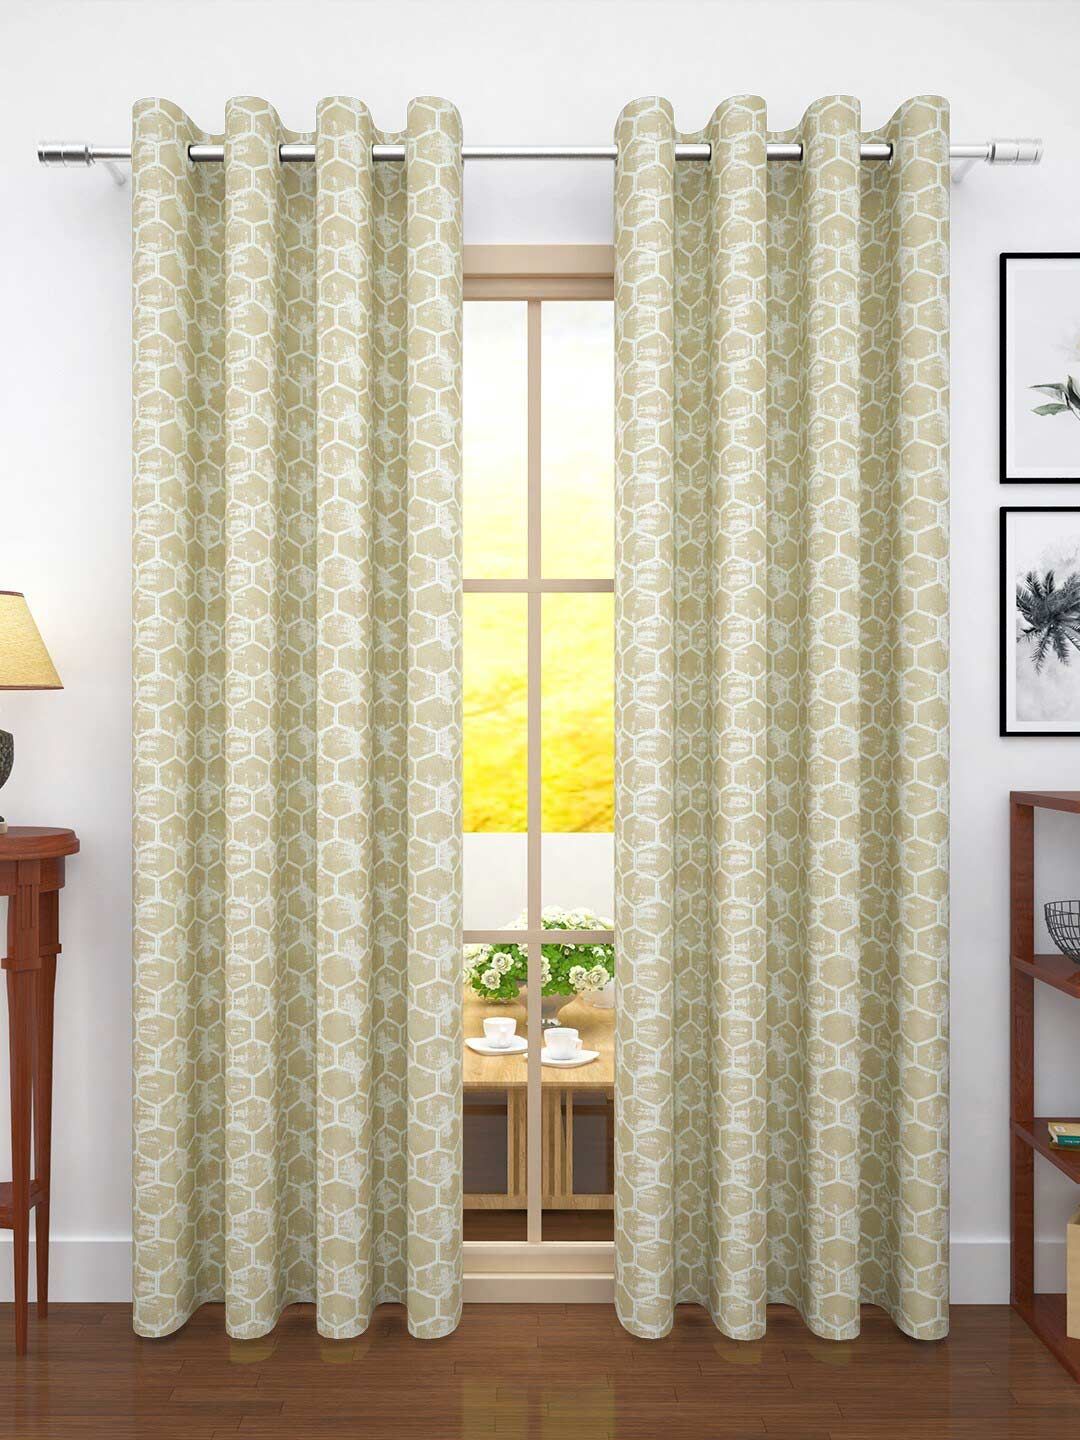 Story@home Jacquard Beige & Off White Set of 2 Room Darkening Long Door Curtains Price in India